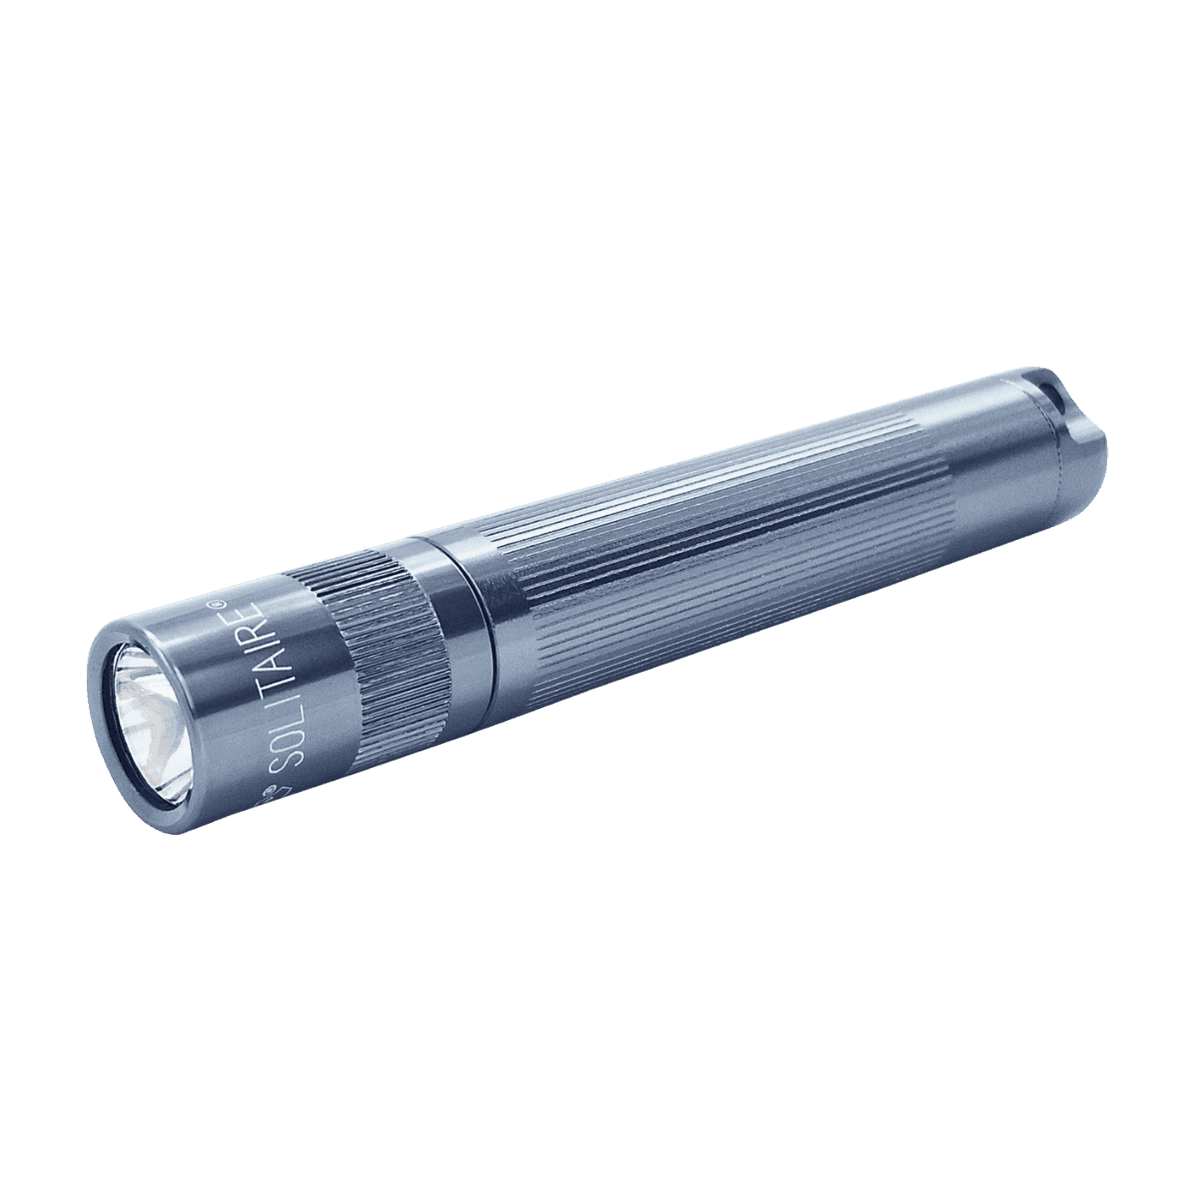 A compact flashlight is a must; the tiny Maglite Solitaire is a great pick. (Maglite)